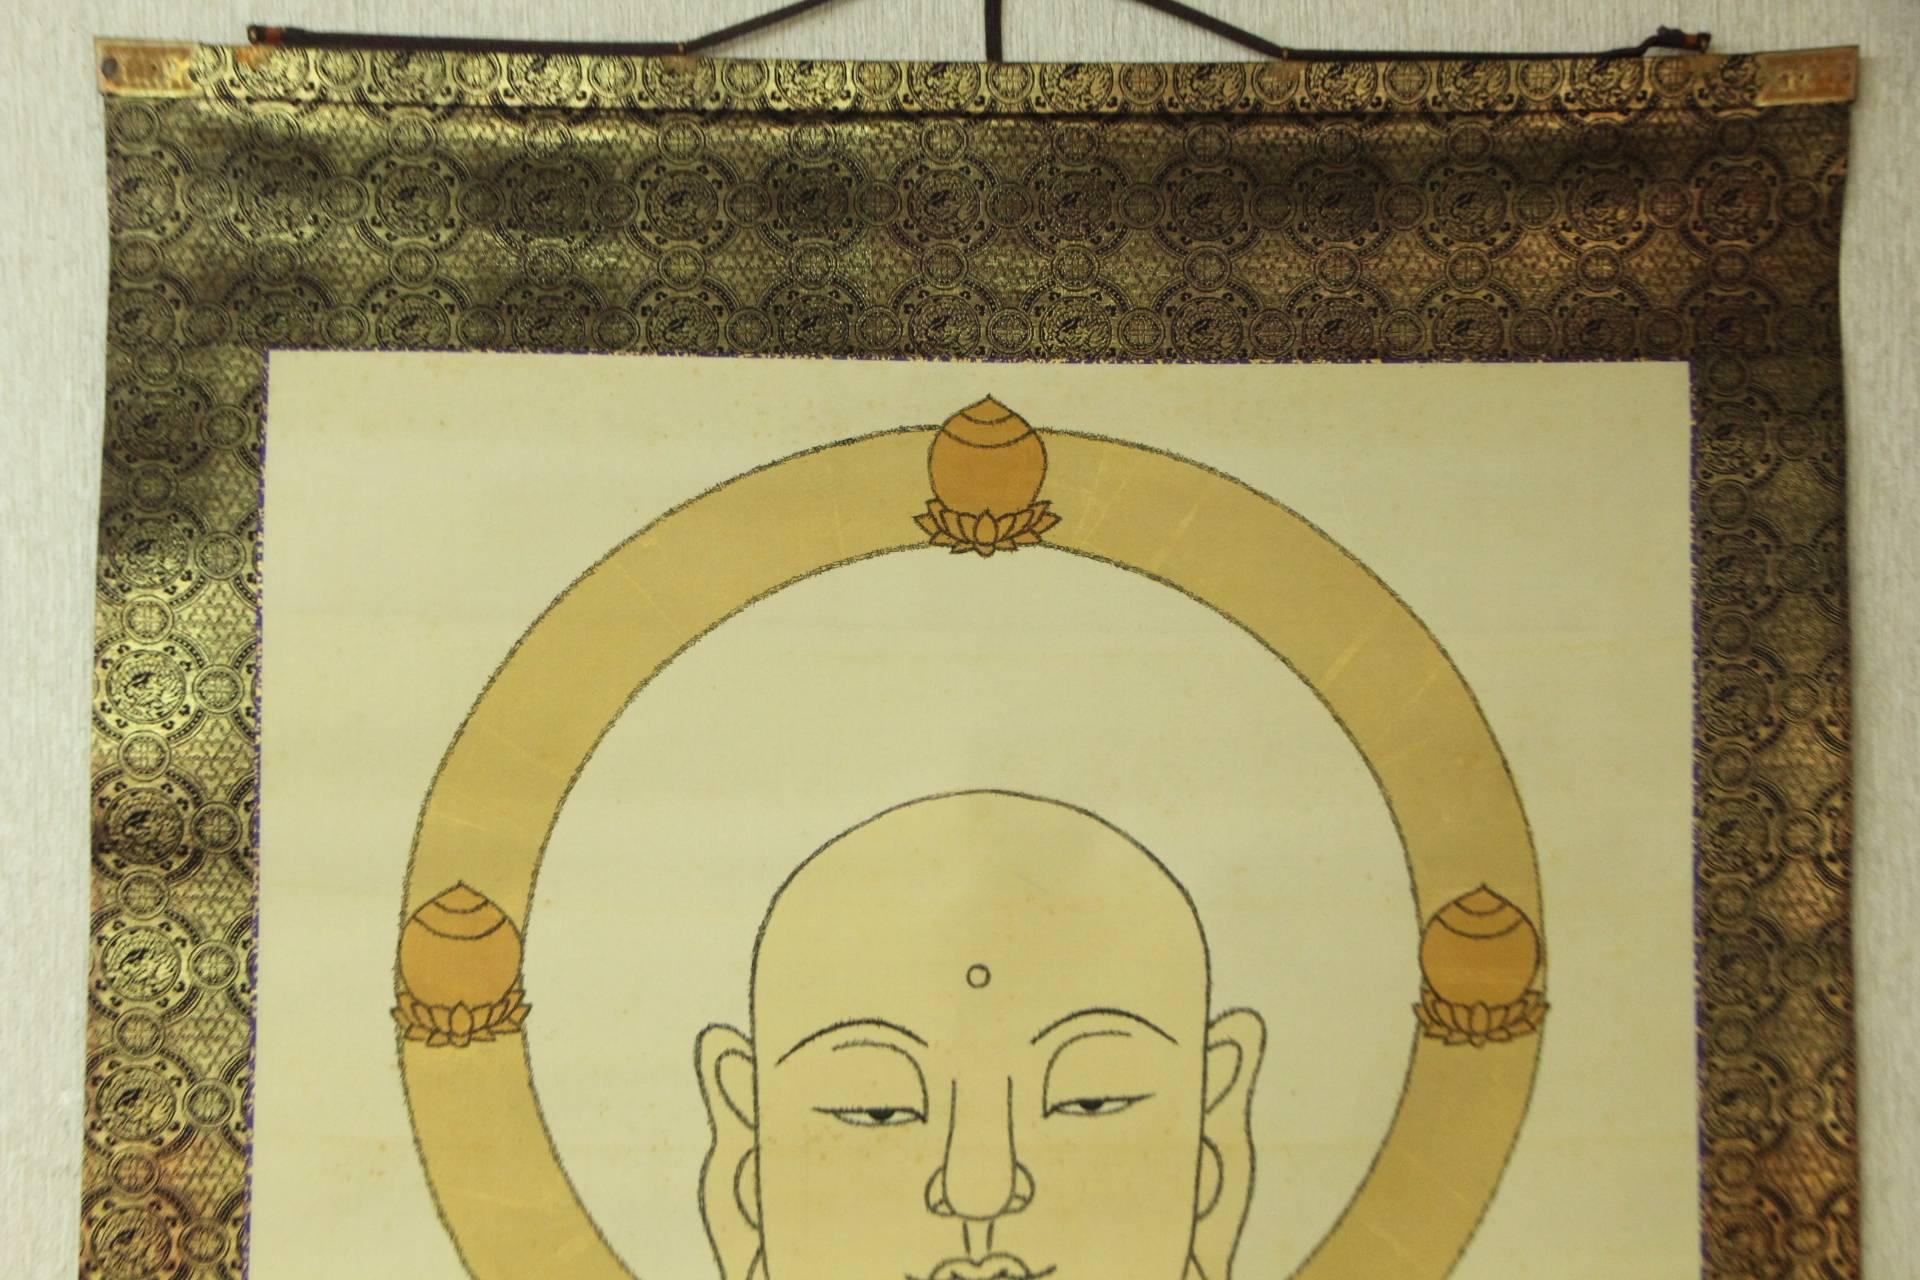 Japan, an important large Temple silk scroll painting of a bodhisattva Arhat holy man practicing the “Soham” meditation mudra right and clasping the hoju wish granting jewel in his left hand standing atop a lotus base. This beautiful and sensitive